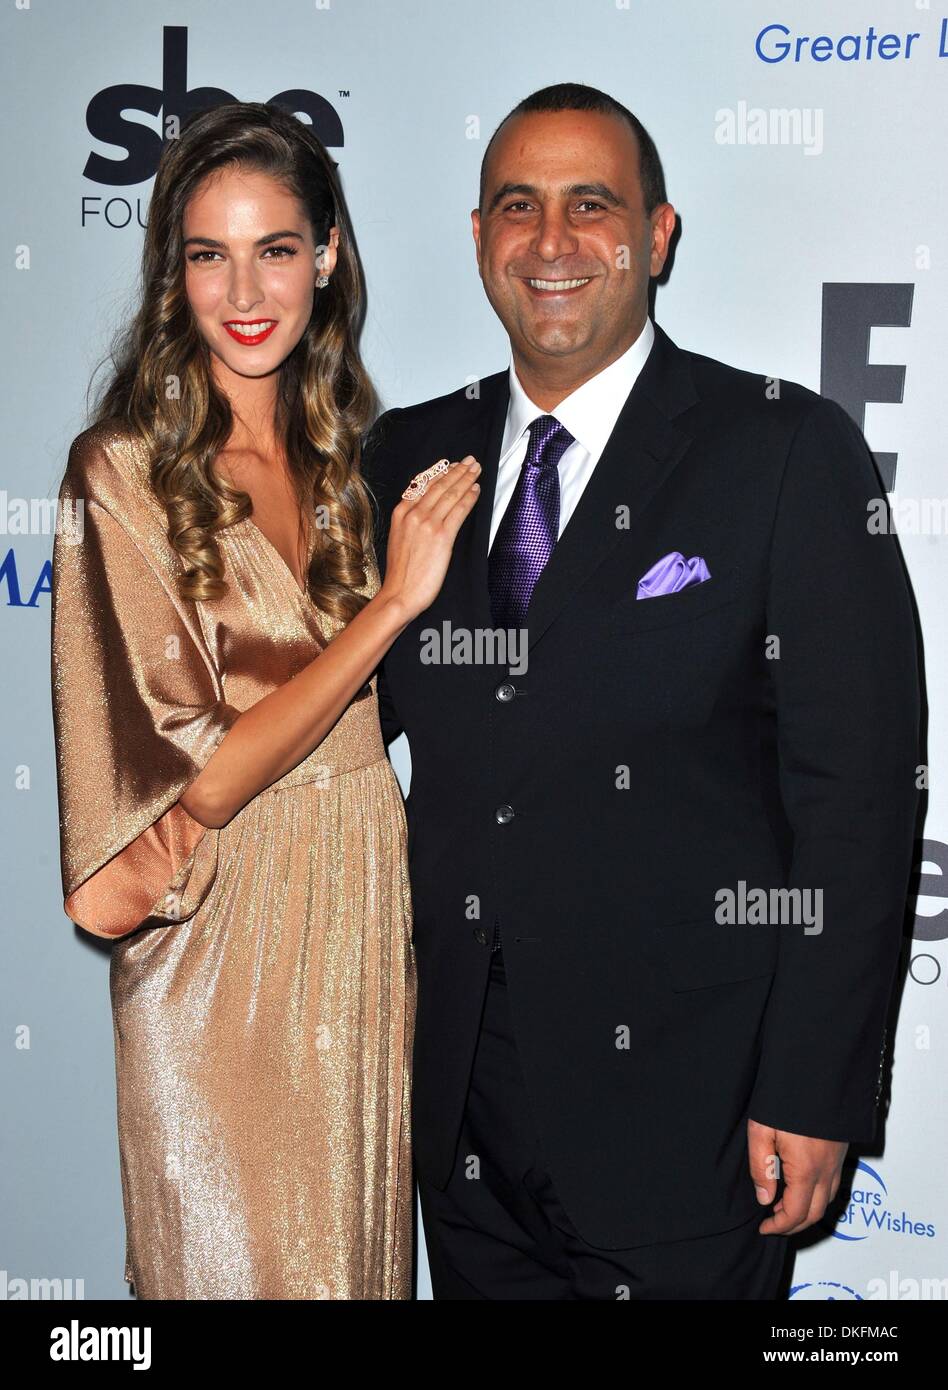 Los Angeles, CA, USA. 4th Dec, 2013. Sam Nazarian at arrivals for Make-A-Wish Greater Los Angeles 30th Anniversary Gala, Beverly Wilshire Hotel, Los Angeles, CA December 4, 2013. Credit:  Dee Cercone/Everett Collection/Alamy Live News Stock Photo